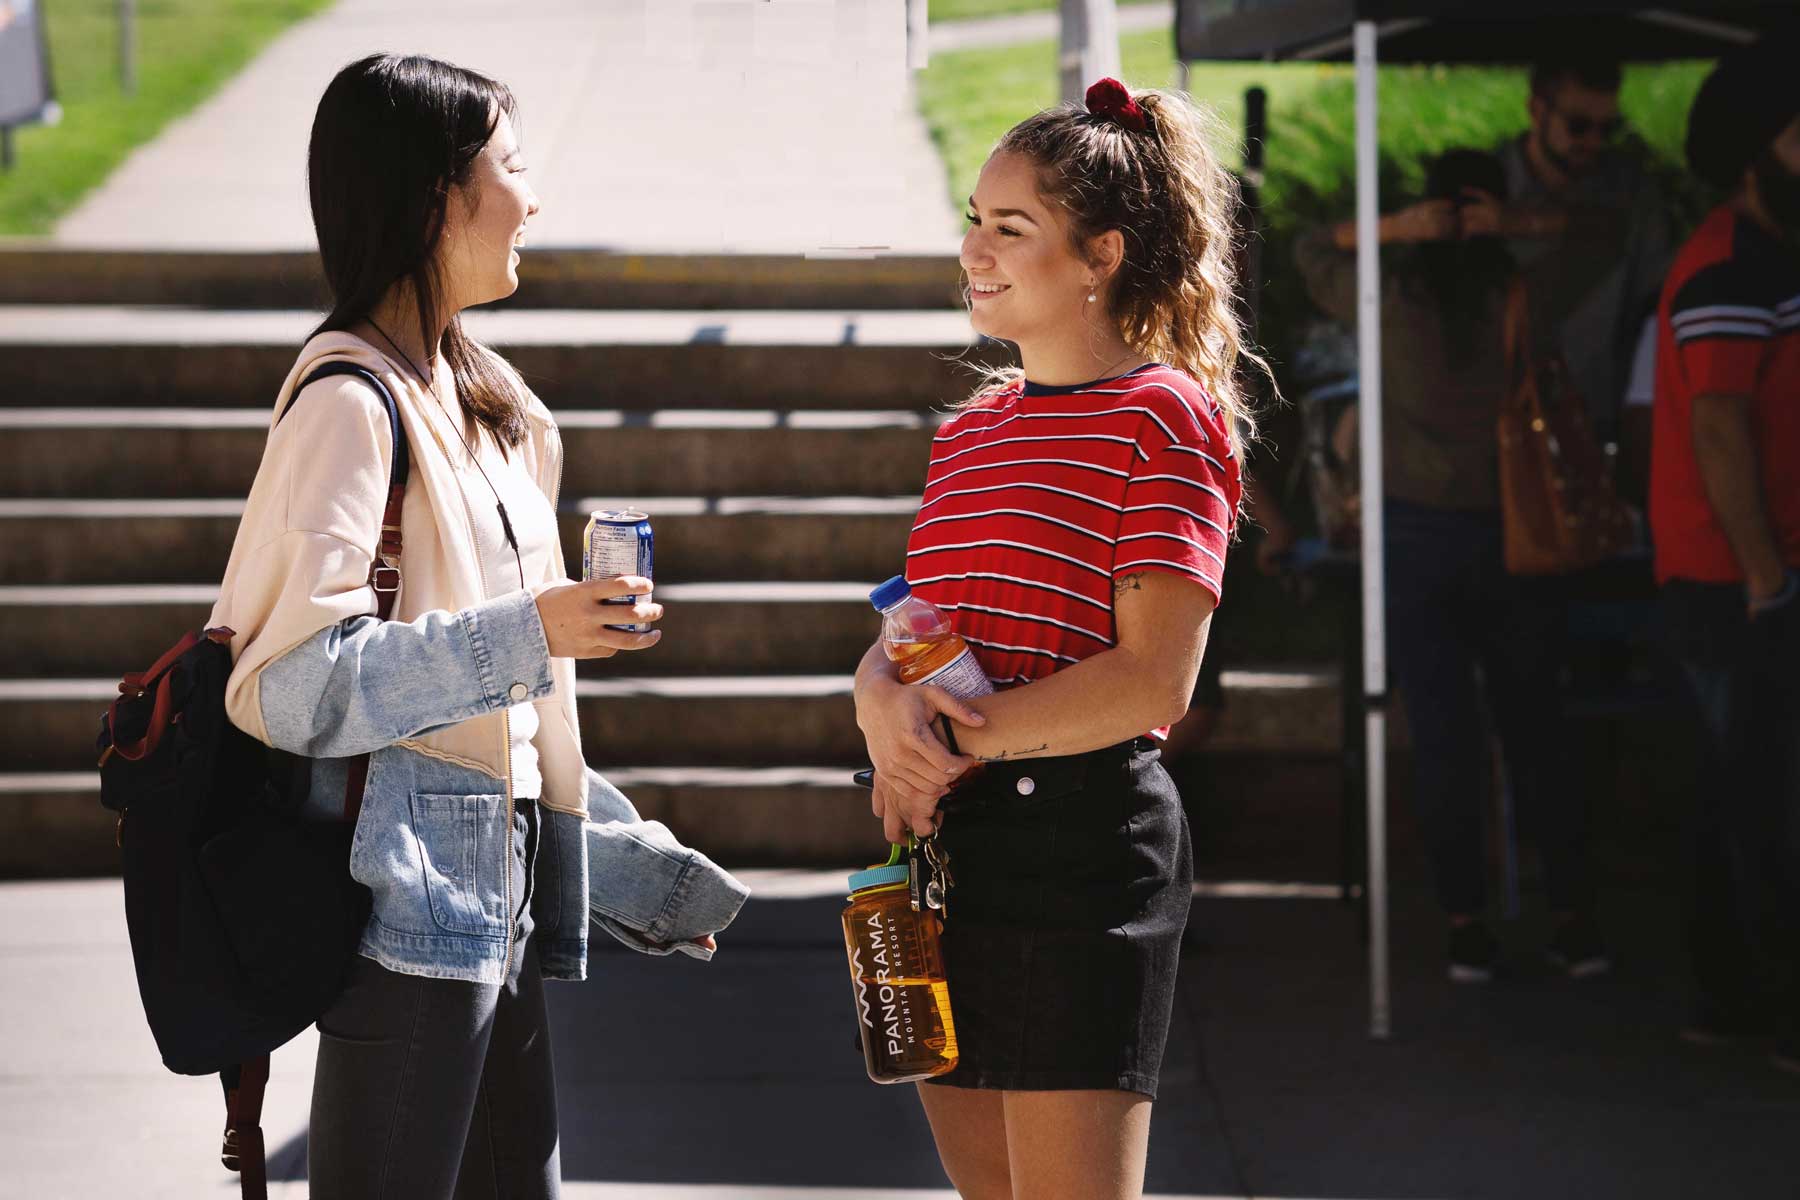 An image of two femals students chatting outdoors.